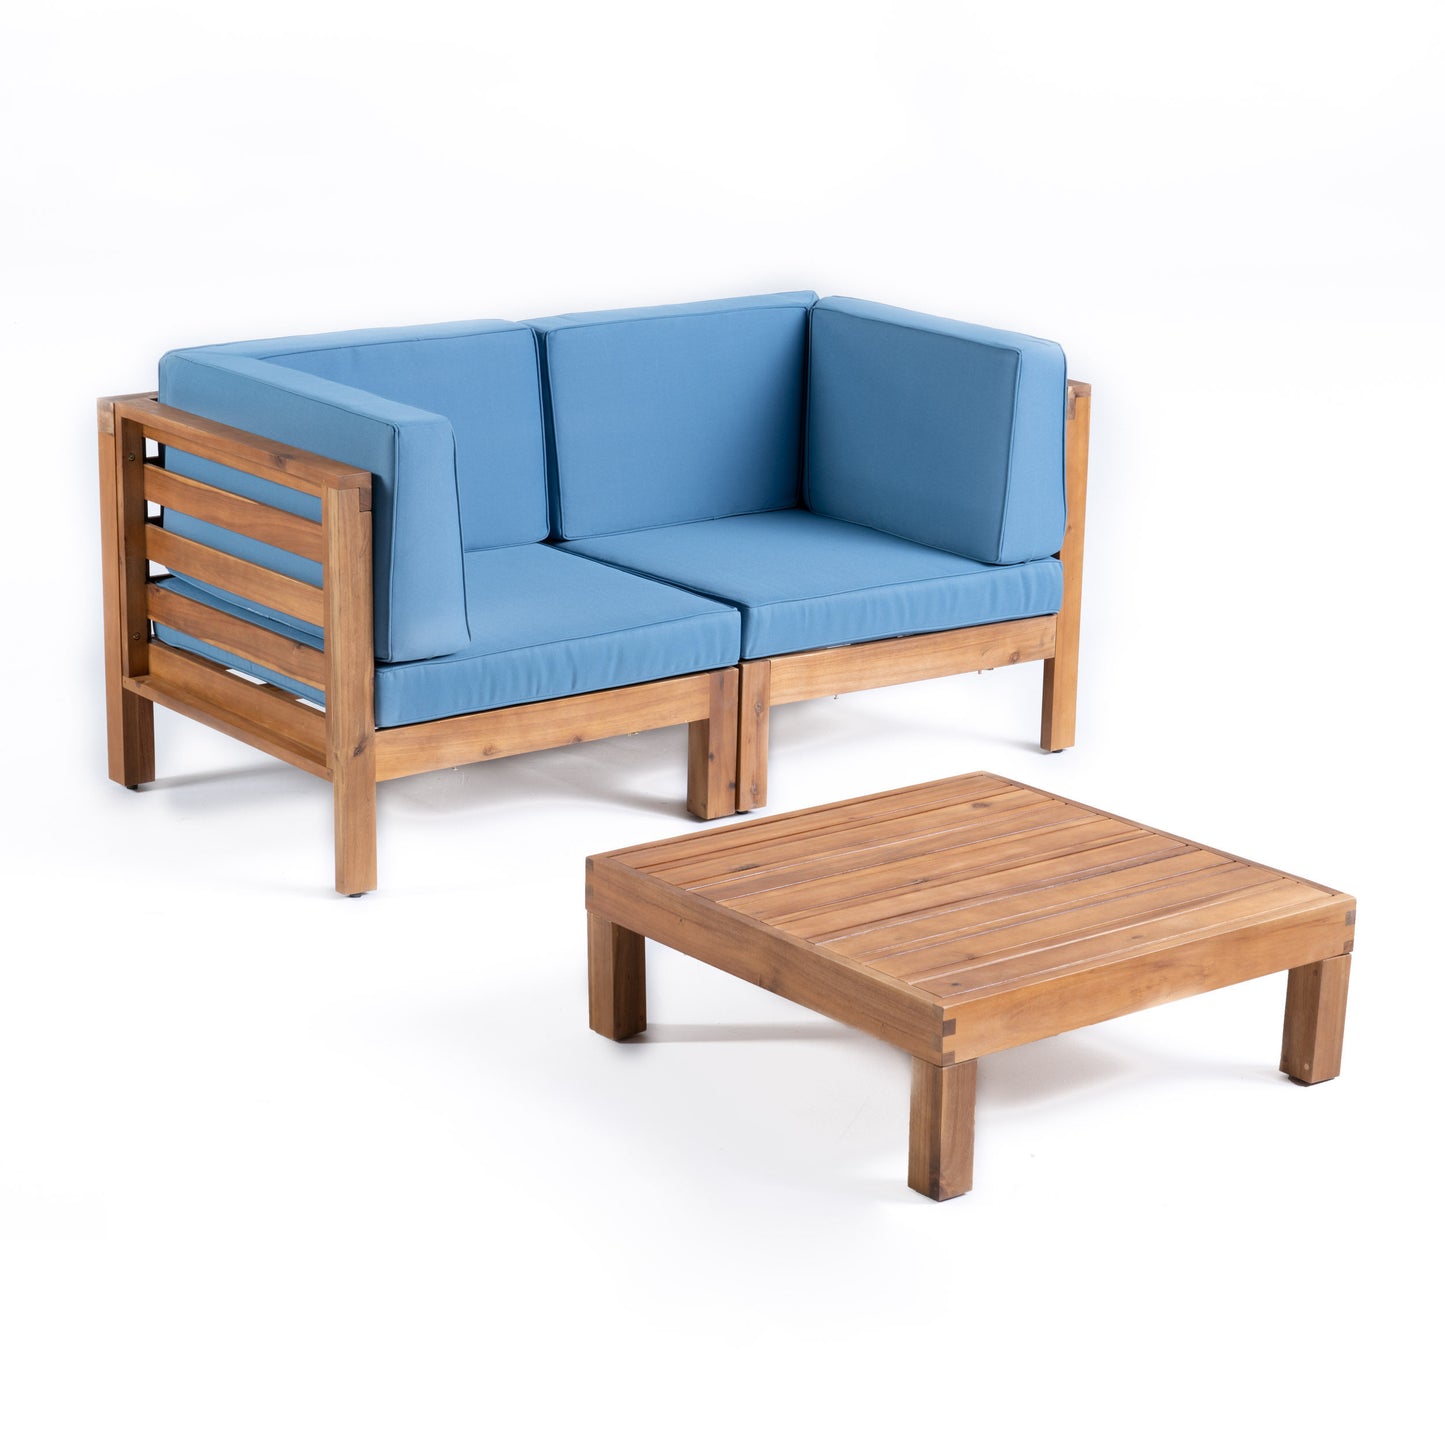 Dawson Outdoor Sectional Love Seat Set with Coffee Table - 3-Piece 2-Seater - Acacia Wood - Outdoor Cushions